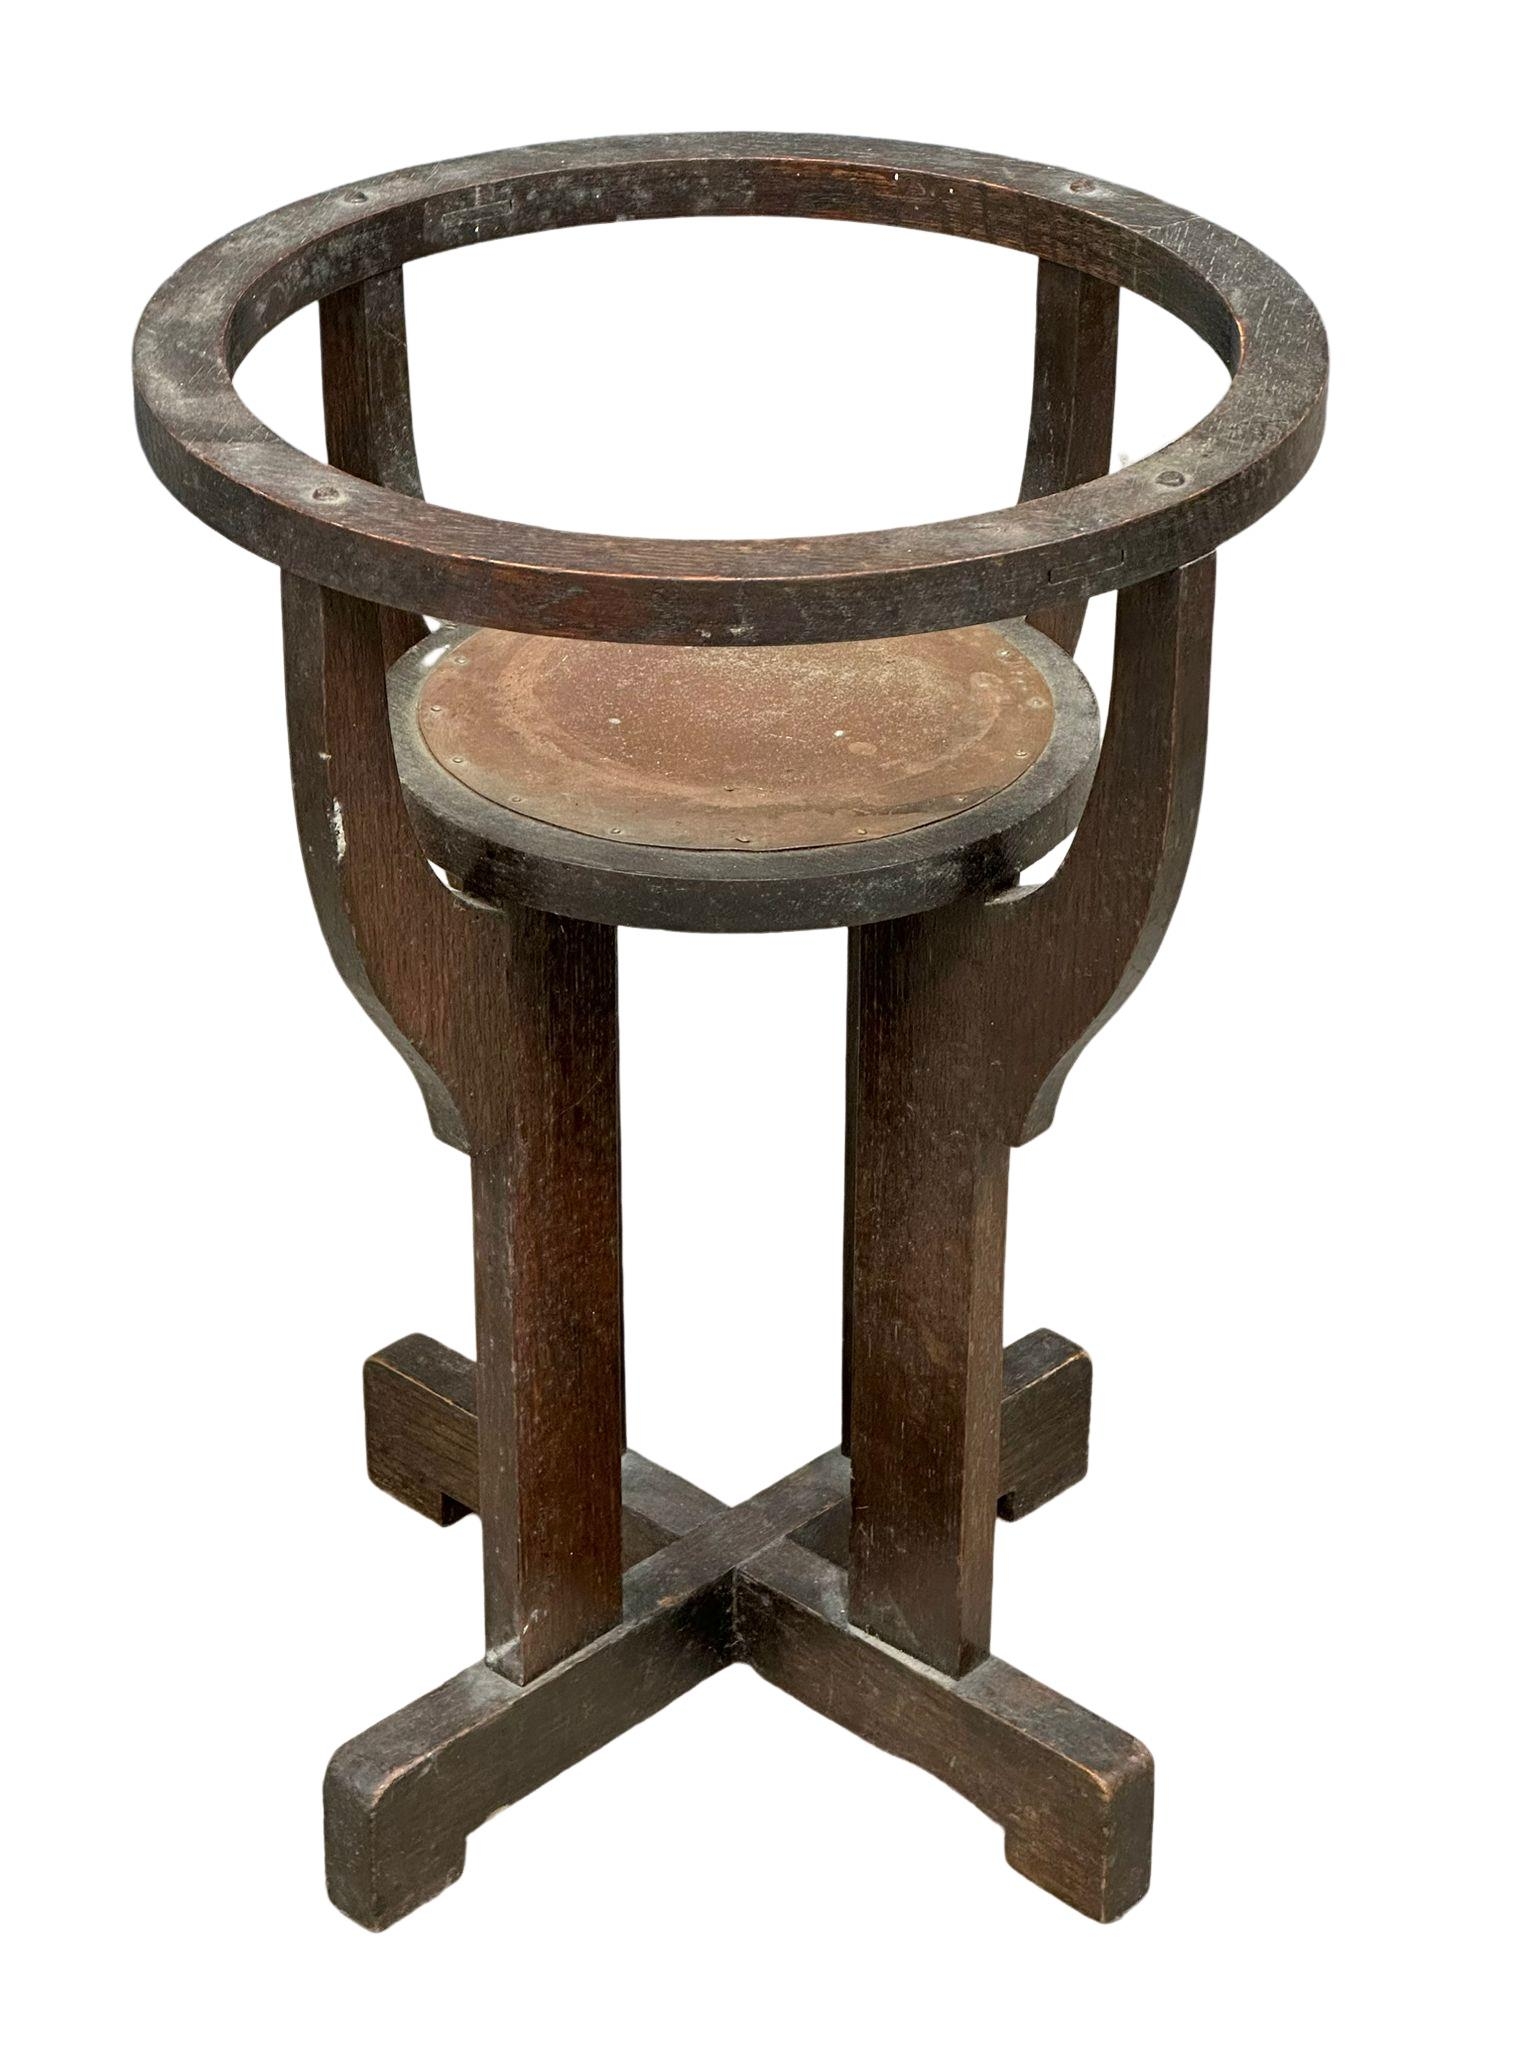 A late 19th/early 20th century oak jardiniere and stand. Circa 1900. - Image 6 of 7